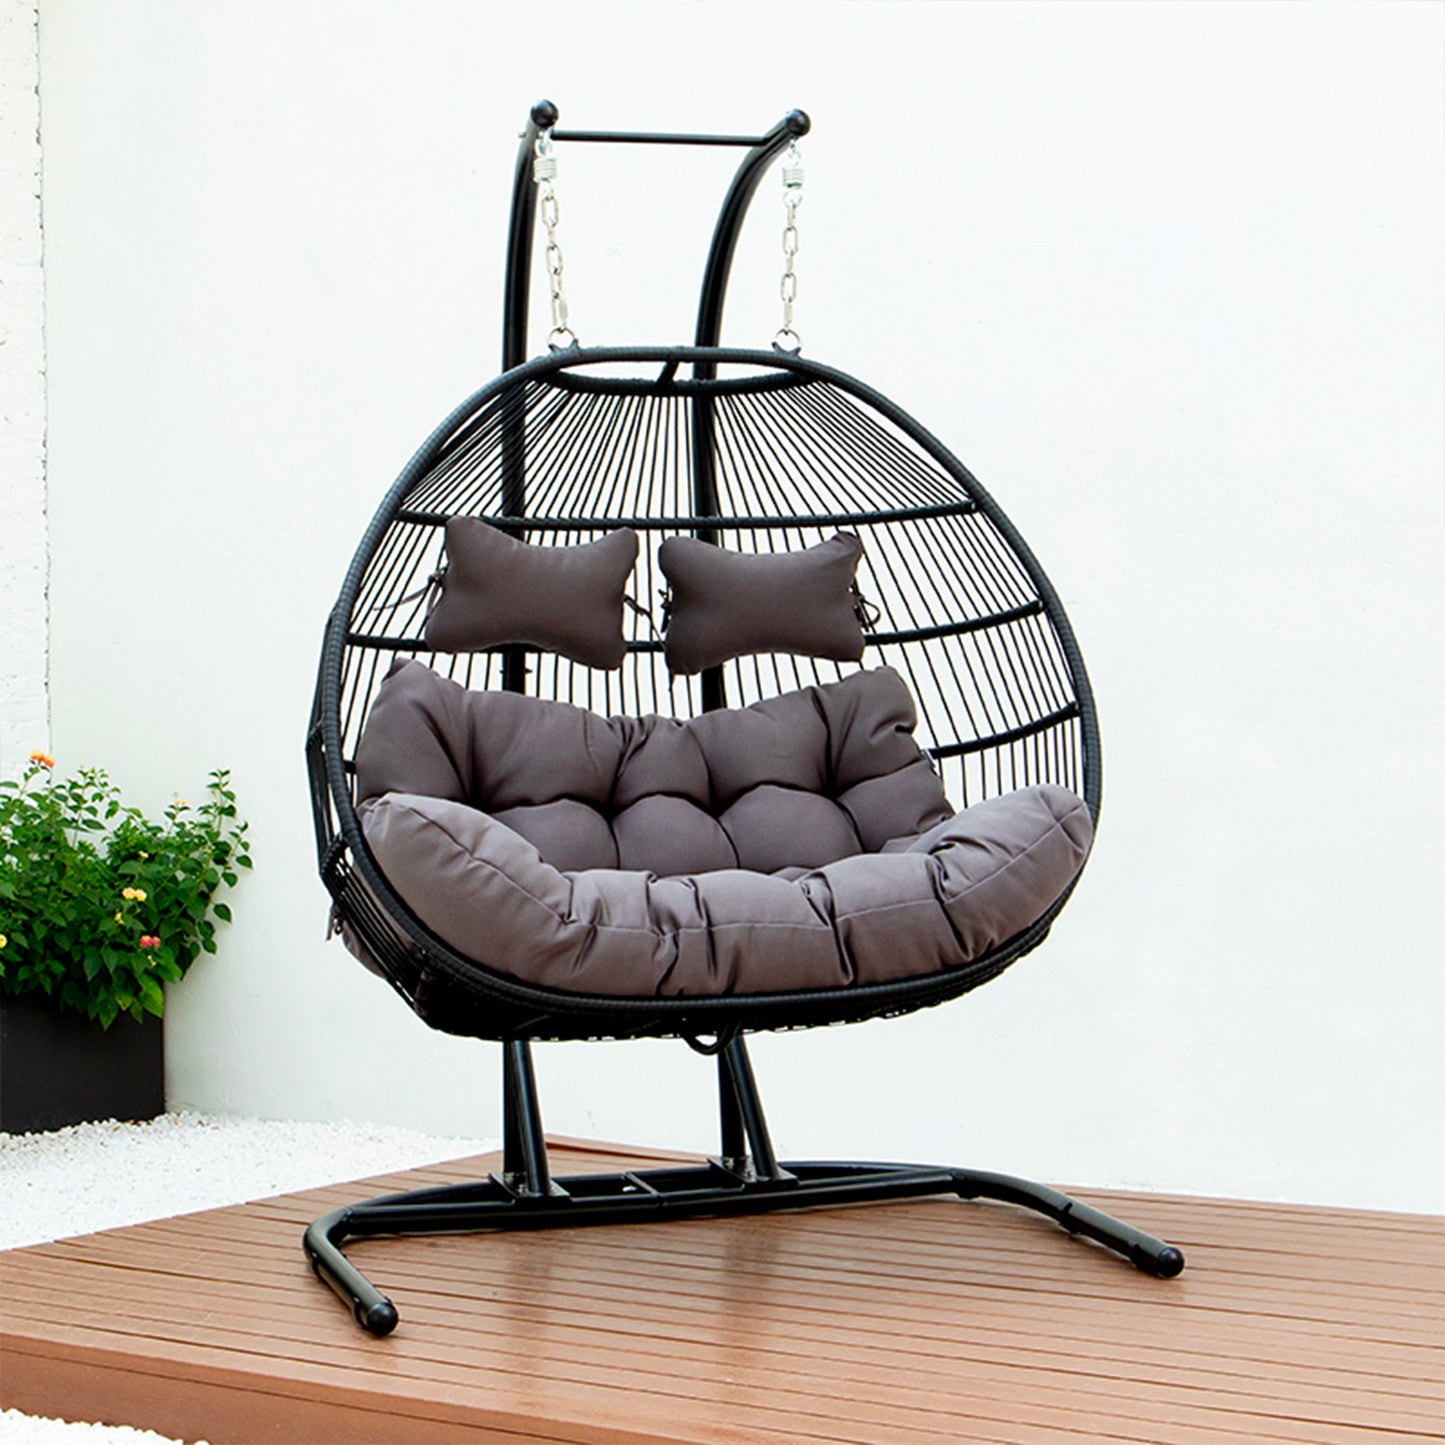 Folding Double Seat Swing Chair With Cushion